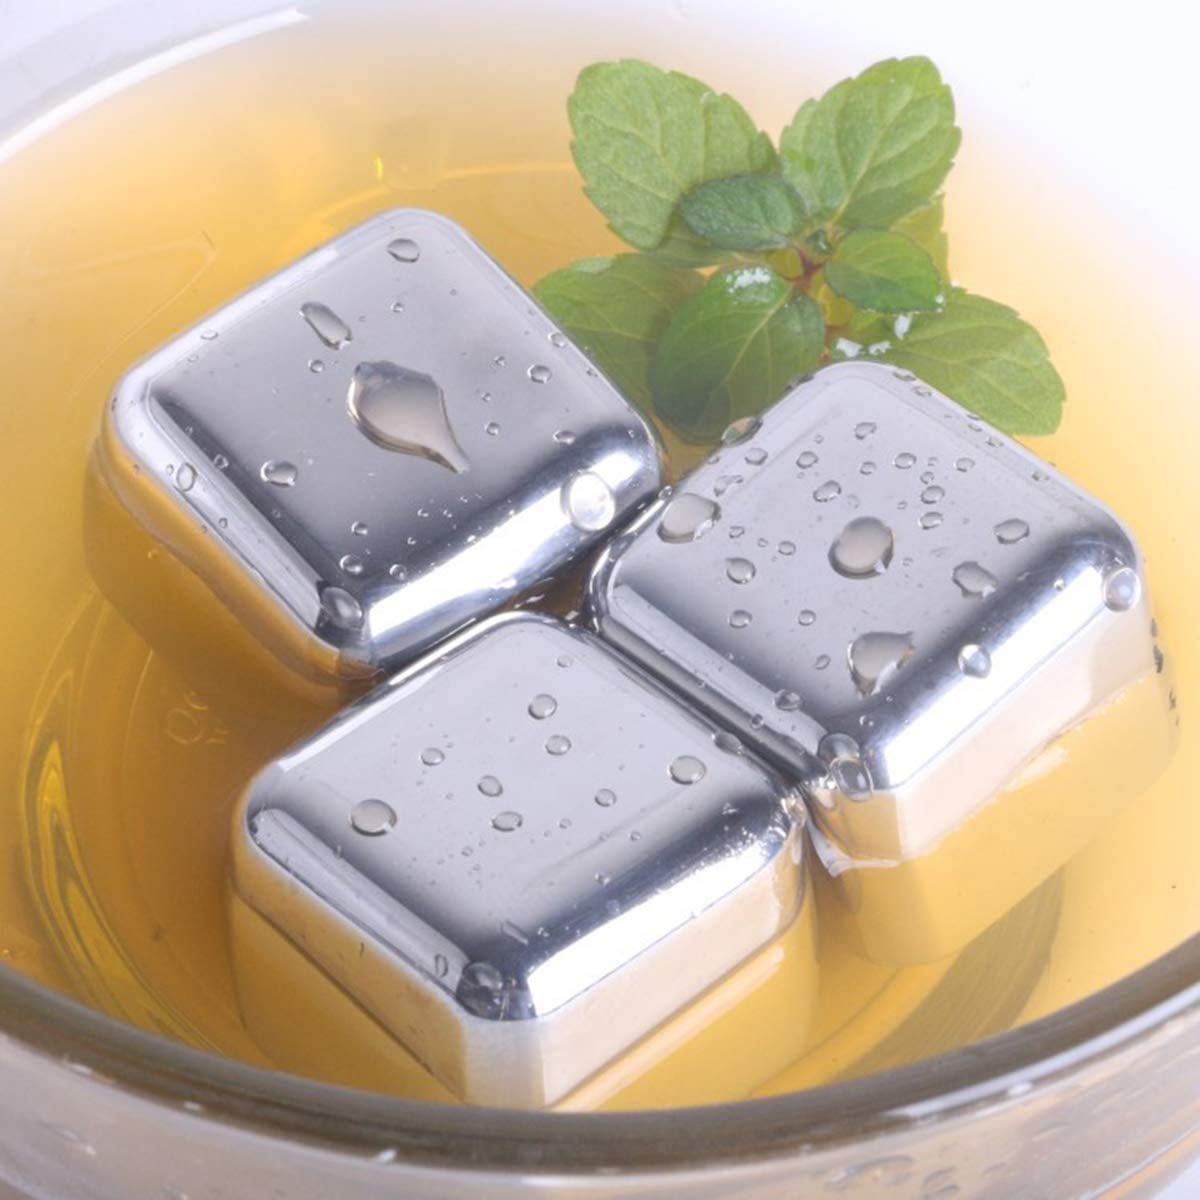 NJ Reusable Stainless Steel Whiskey Stones or Ice Cubes, Set of 4 Ice Cubes